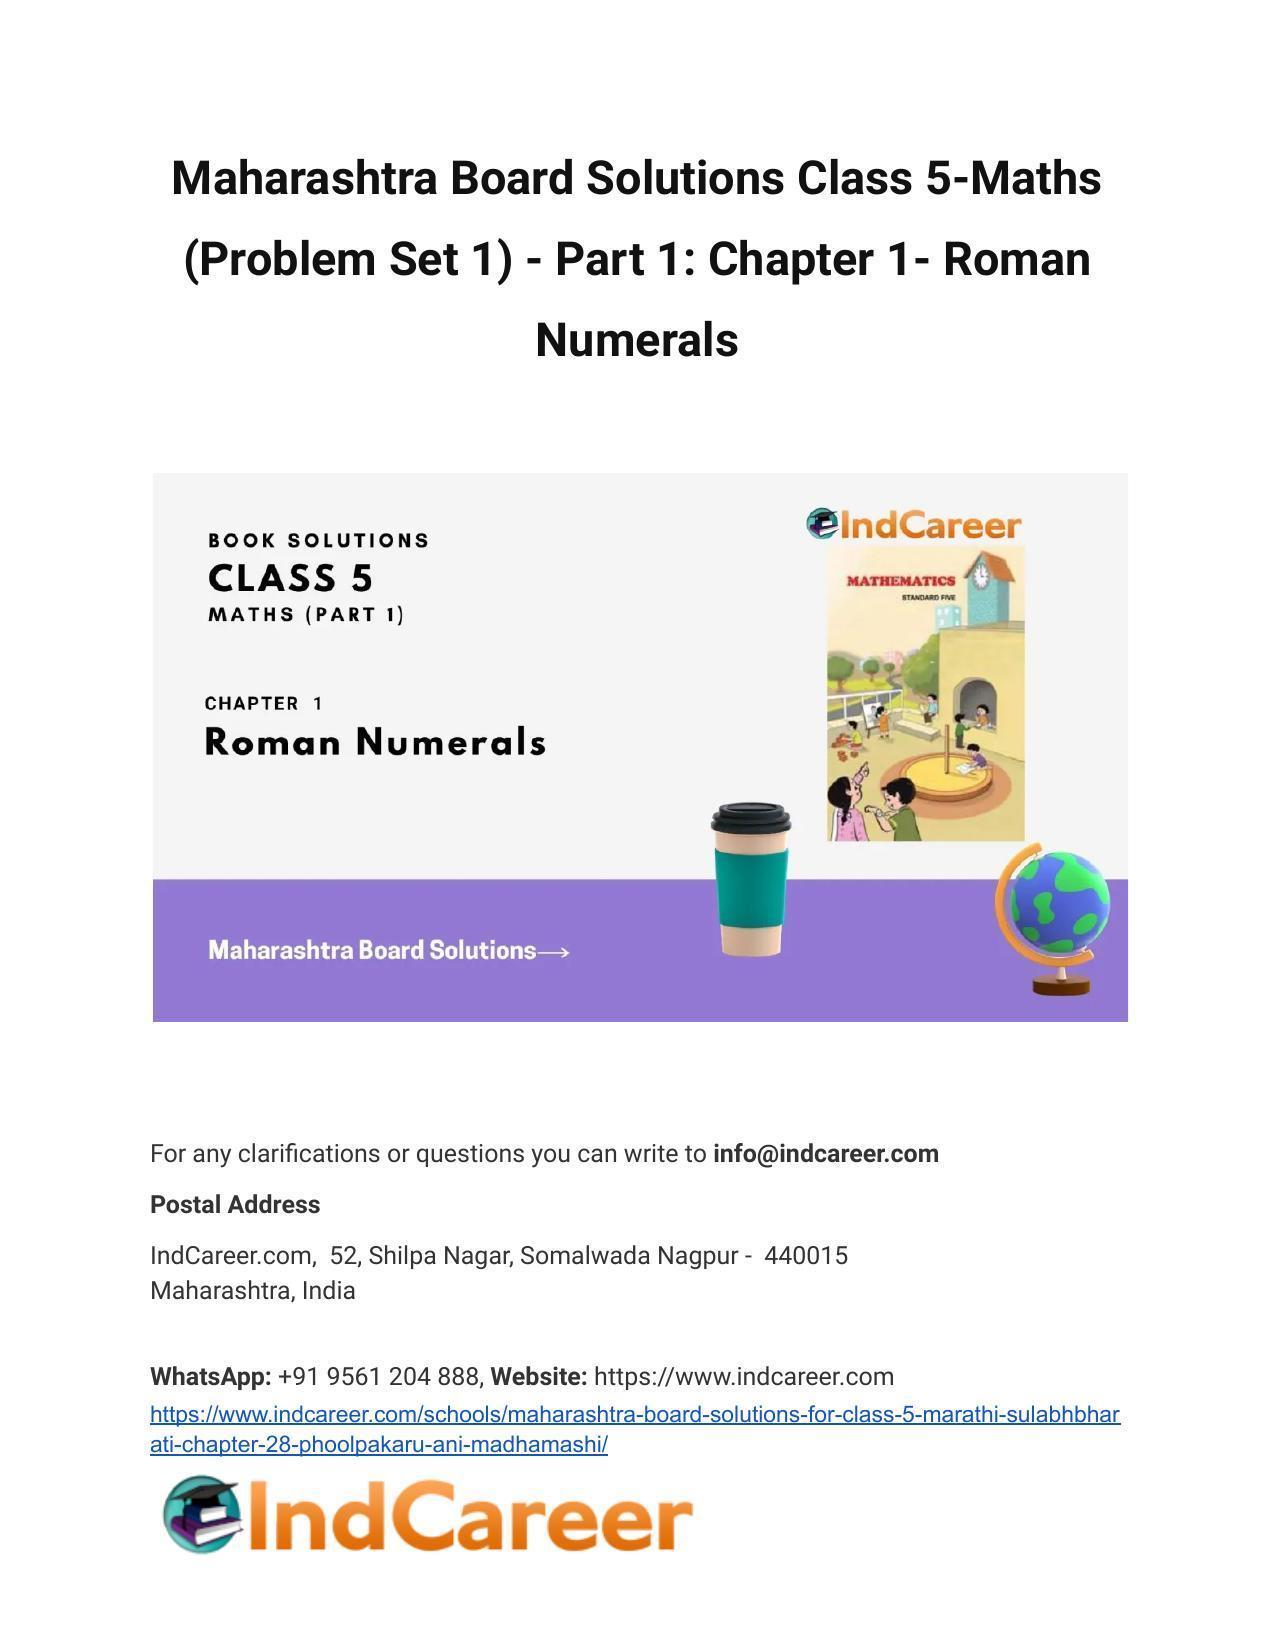 Maharashtra Board Solutions Class 5-Maths (Problem Set 1) - Part 1: Chapter 1- Roman Numerals - Page 1